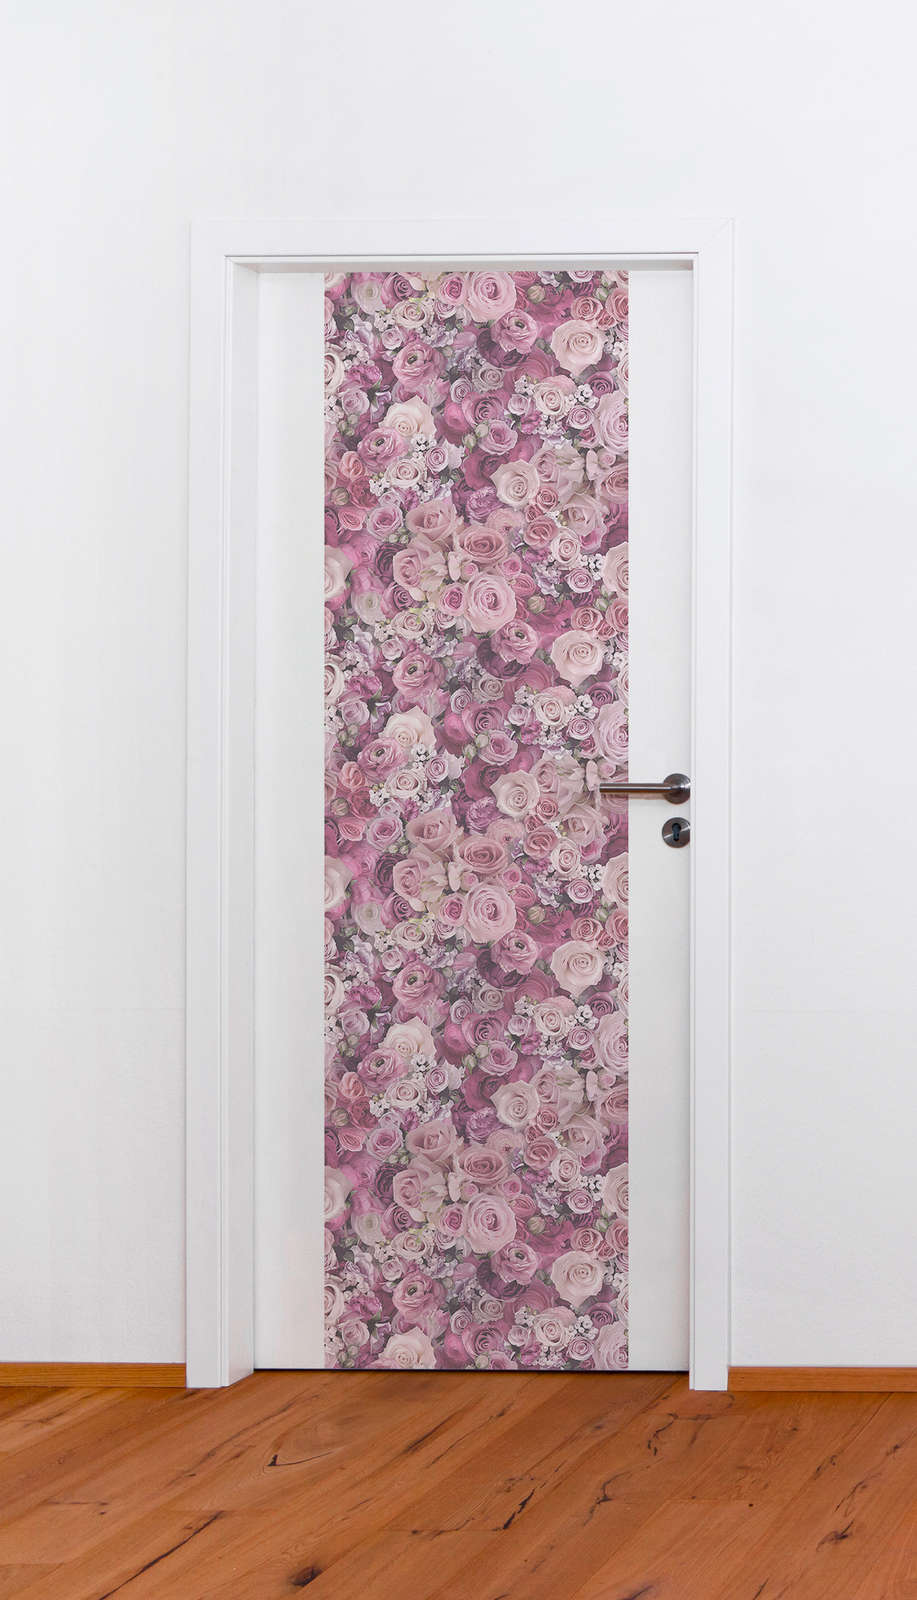             Non-woven wallpaper roses with 3D motif - pink, violet
        